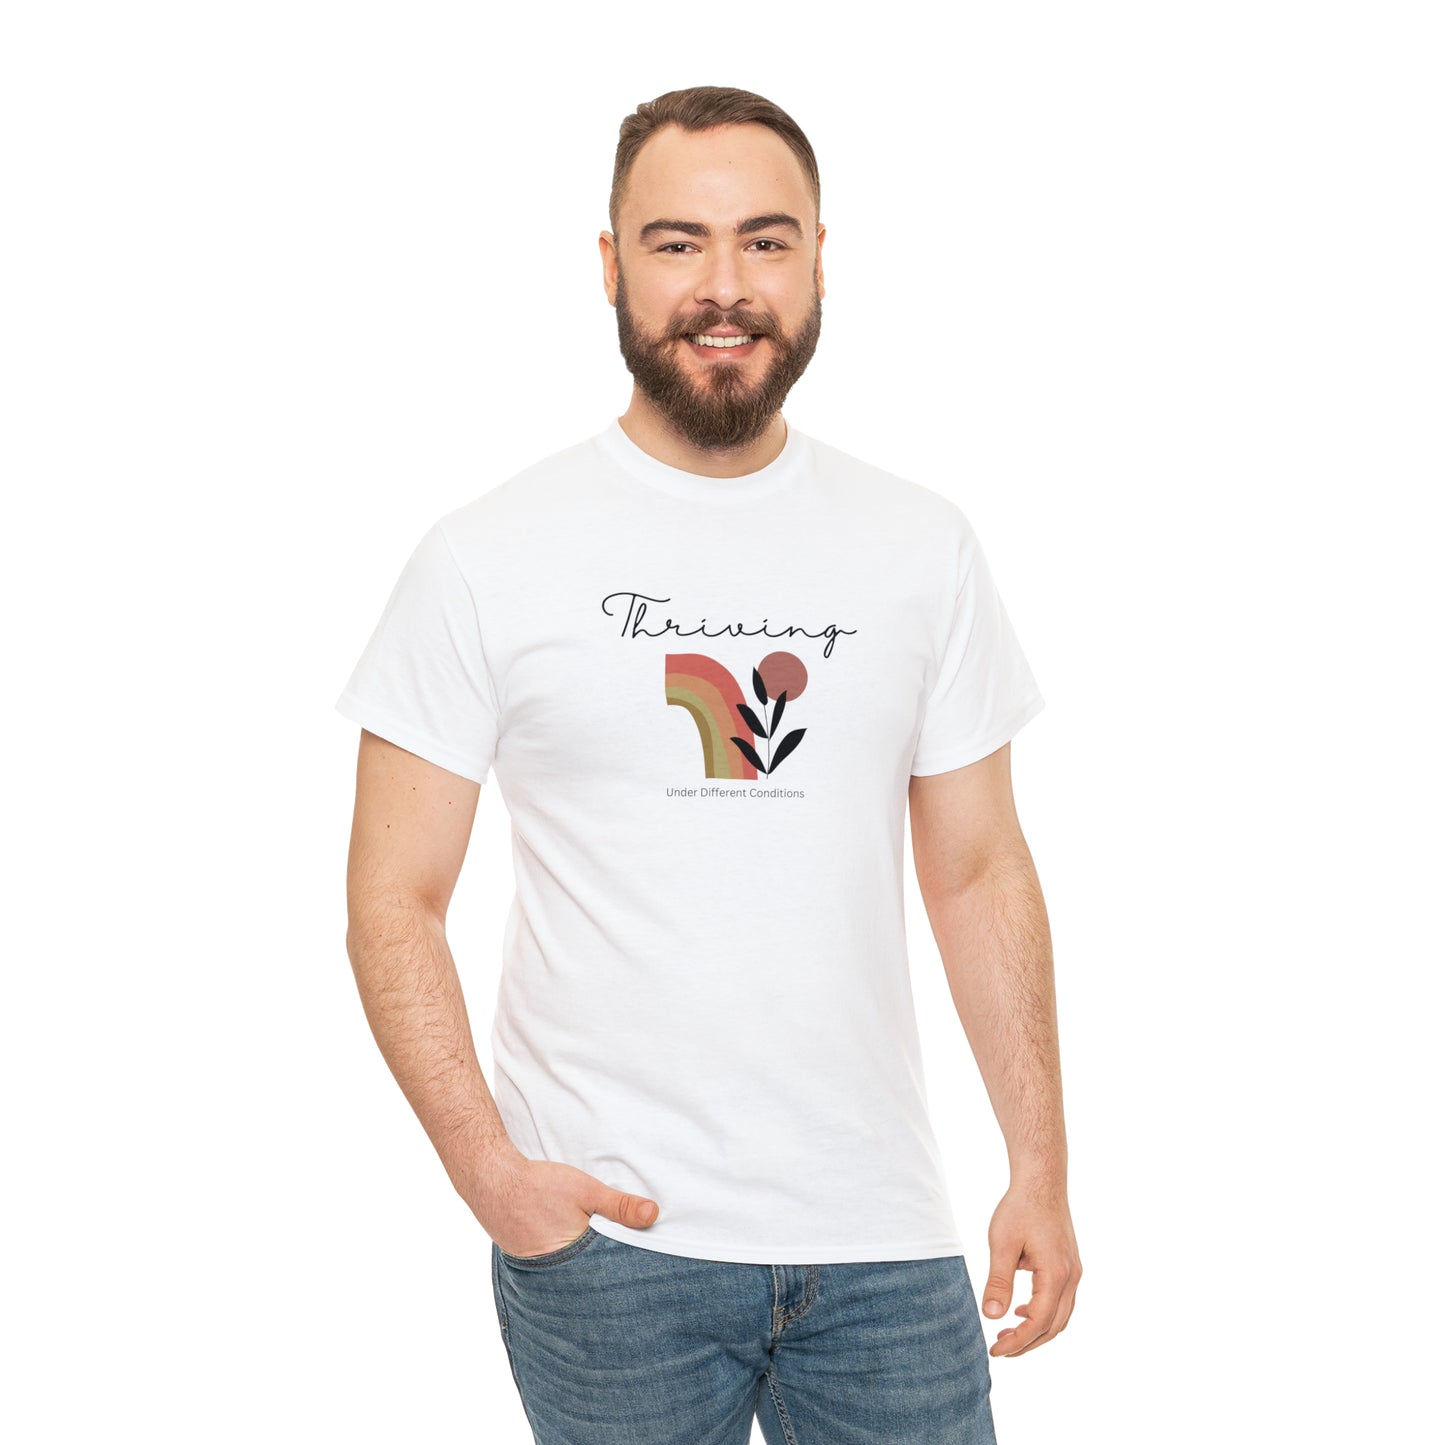 Thriving Under Different Conditions T-shirt